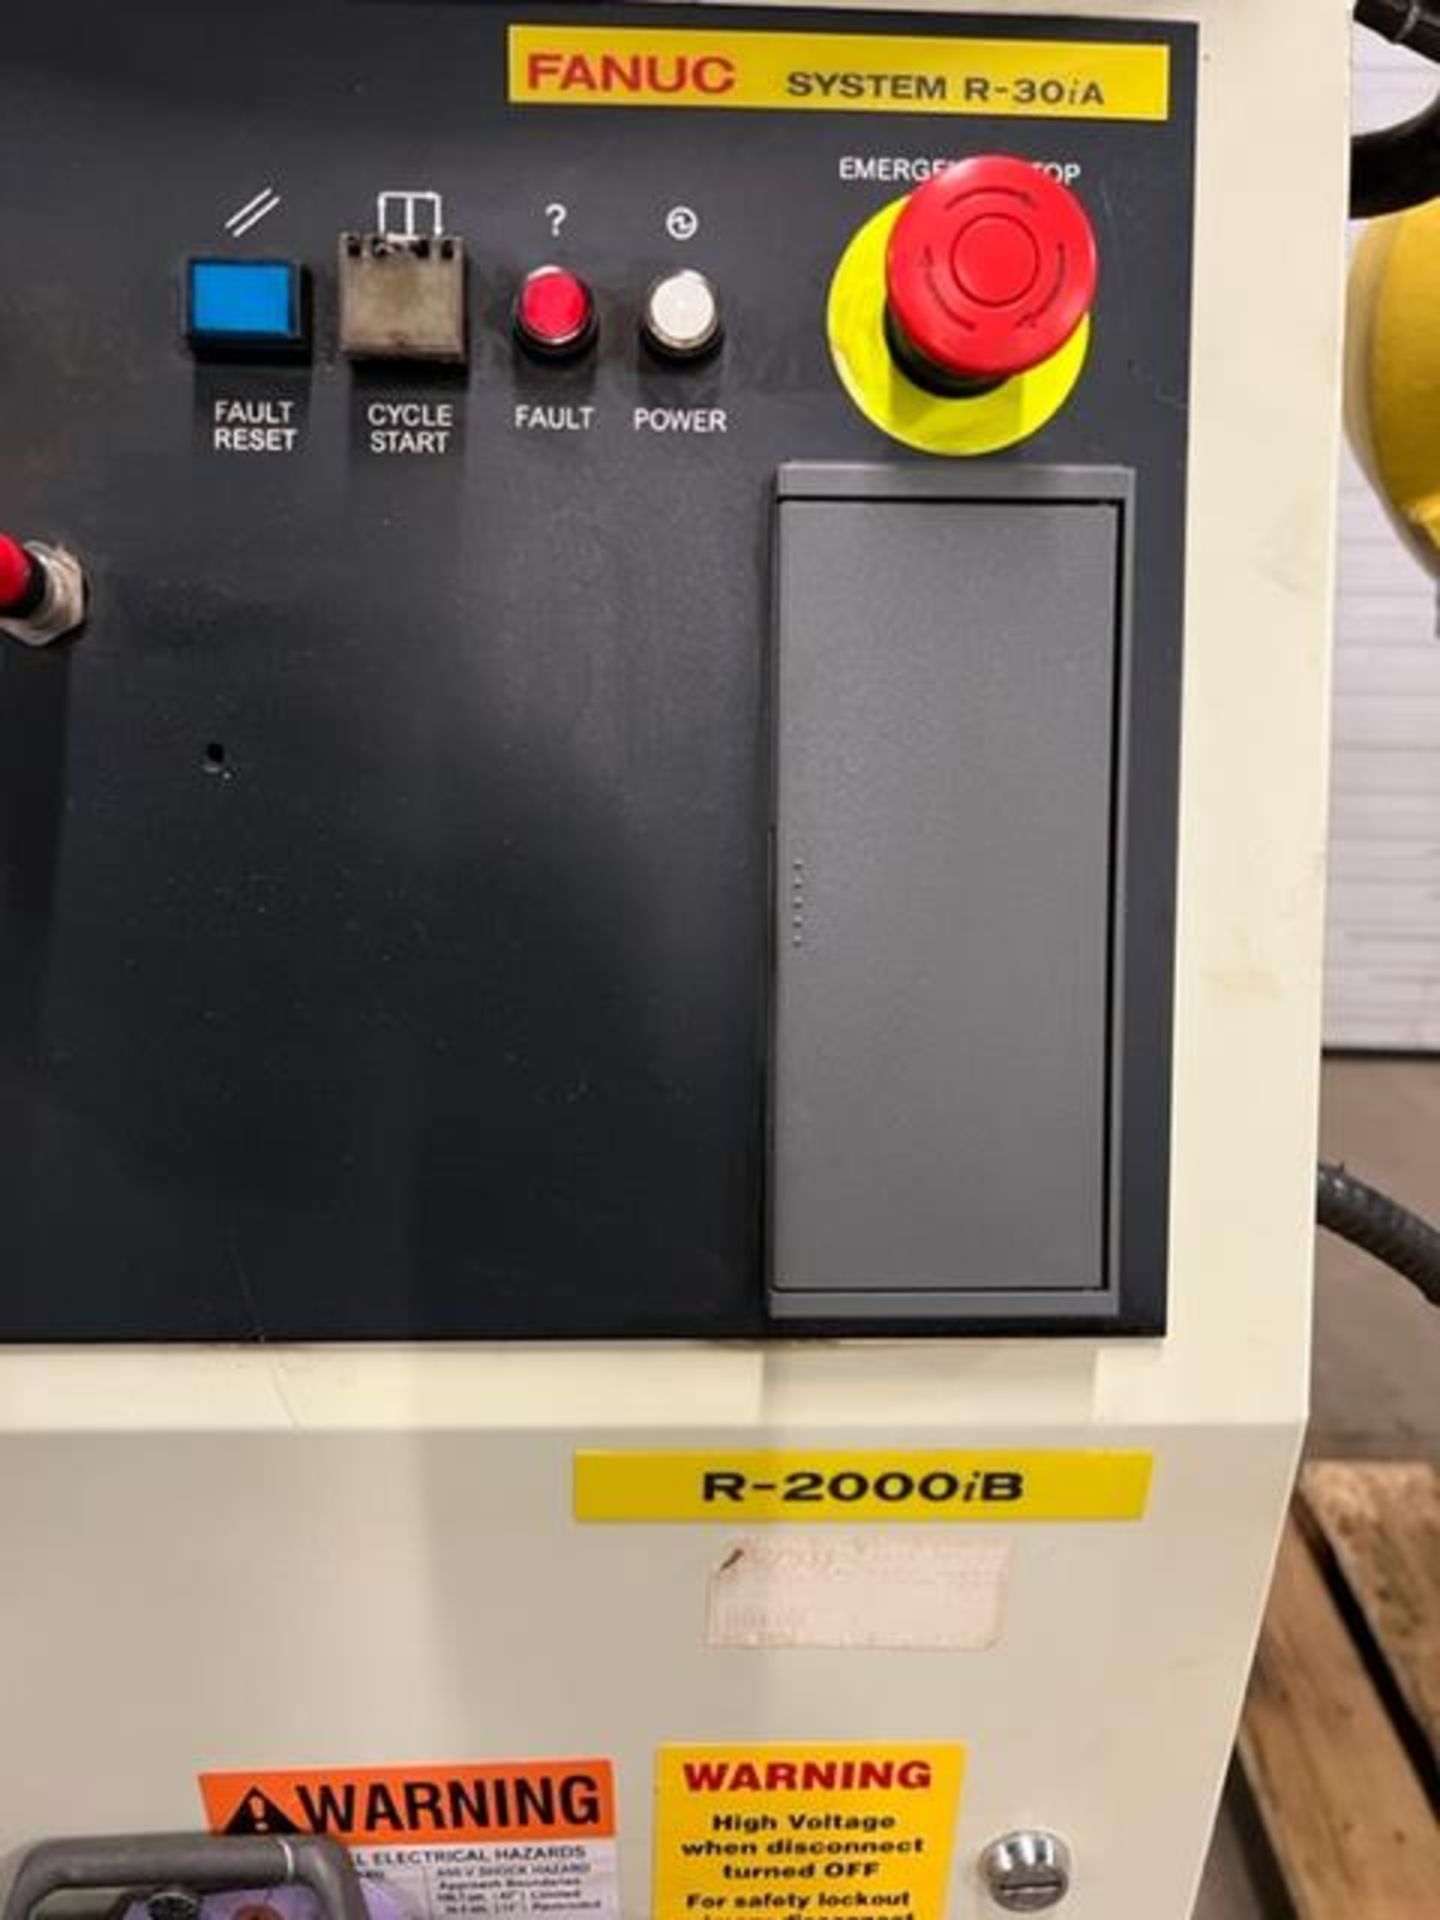 MINT 2008 Fanuc Handling Robot Model R-2000iB 125L - 125kg payload with R-30iA Controller and - Image 3 of 3